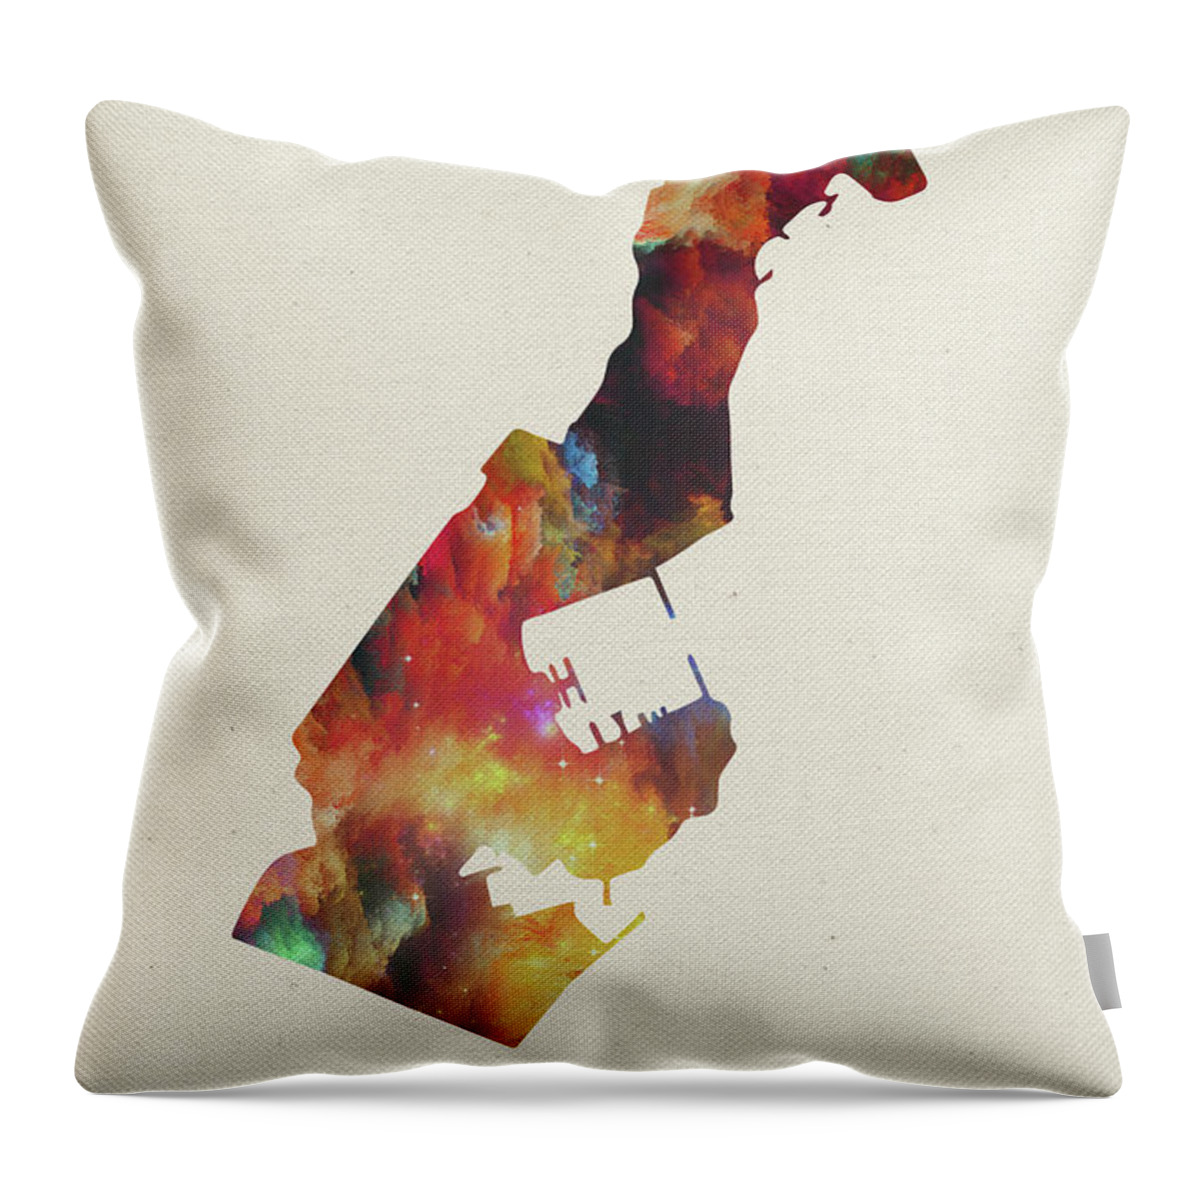 Monaco Throw Pillow featuring the mixed media Monaco Watercolor Map by Design Turnpike